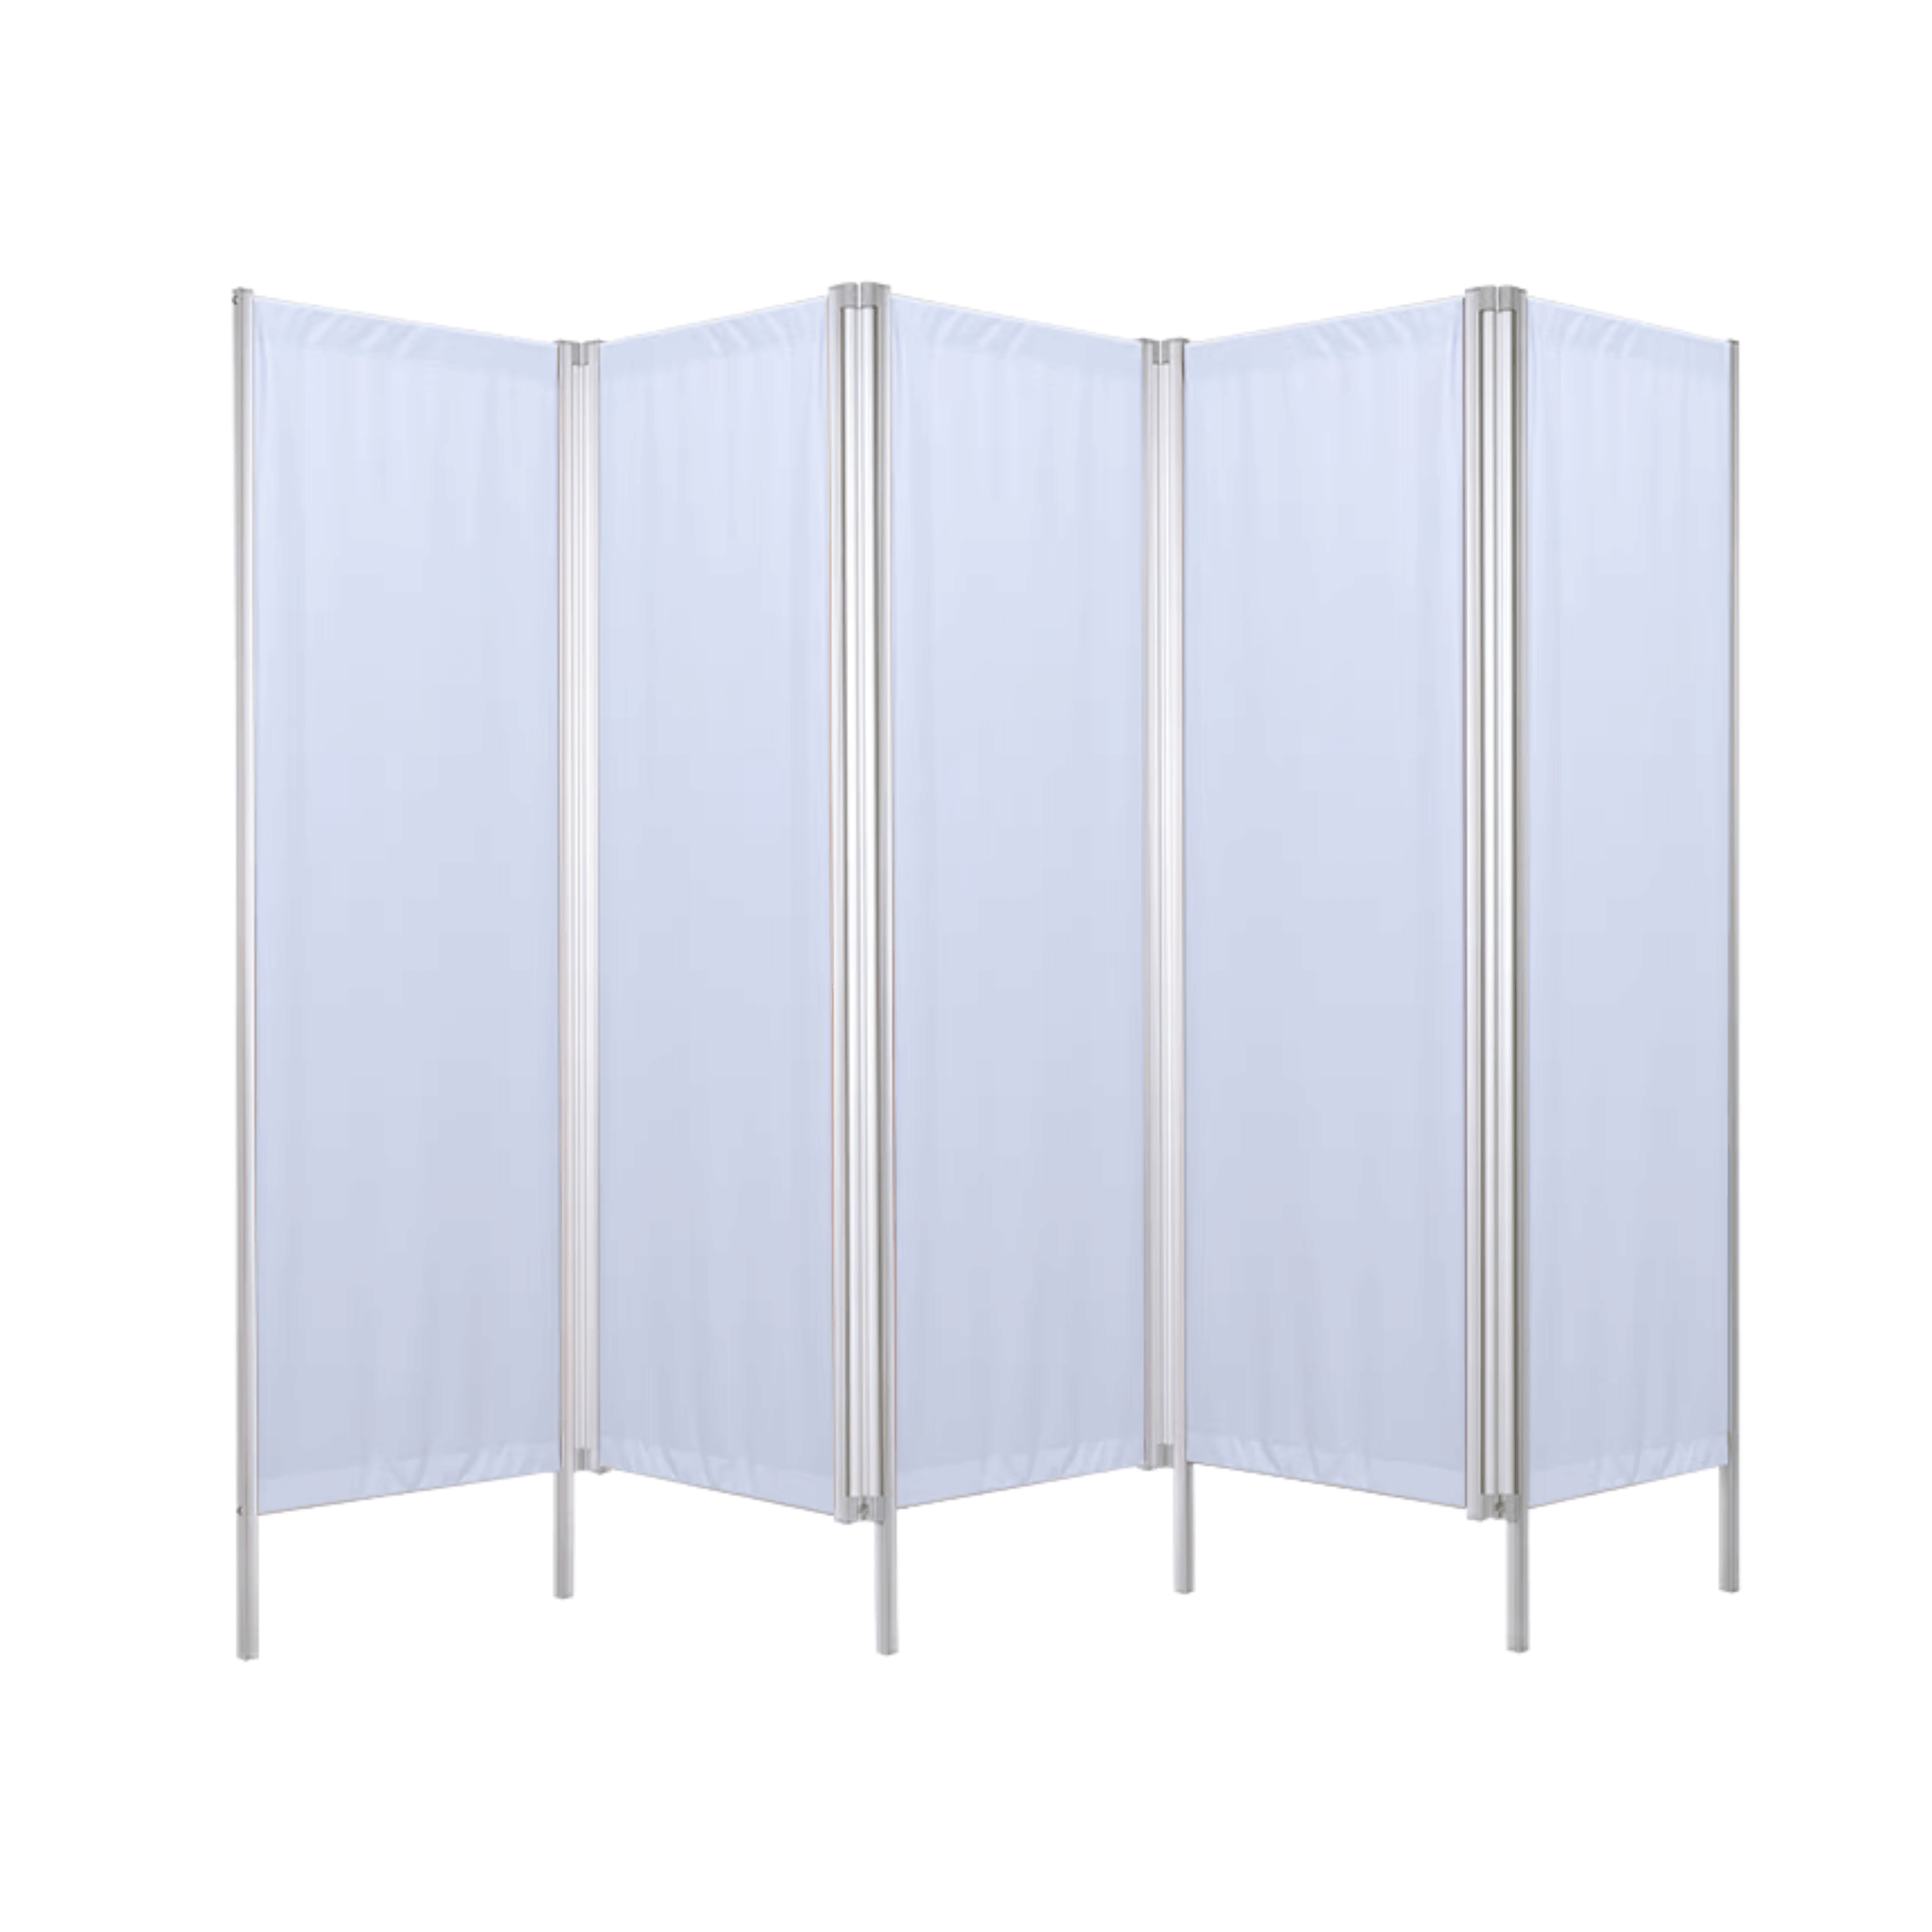 Privacy Screen- Lightweight, Folding, 4 Section, White, 165 X 204 cm